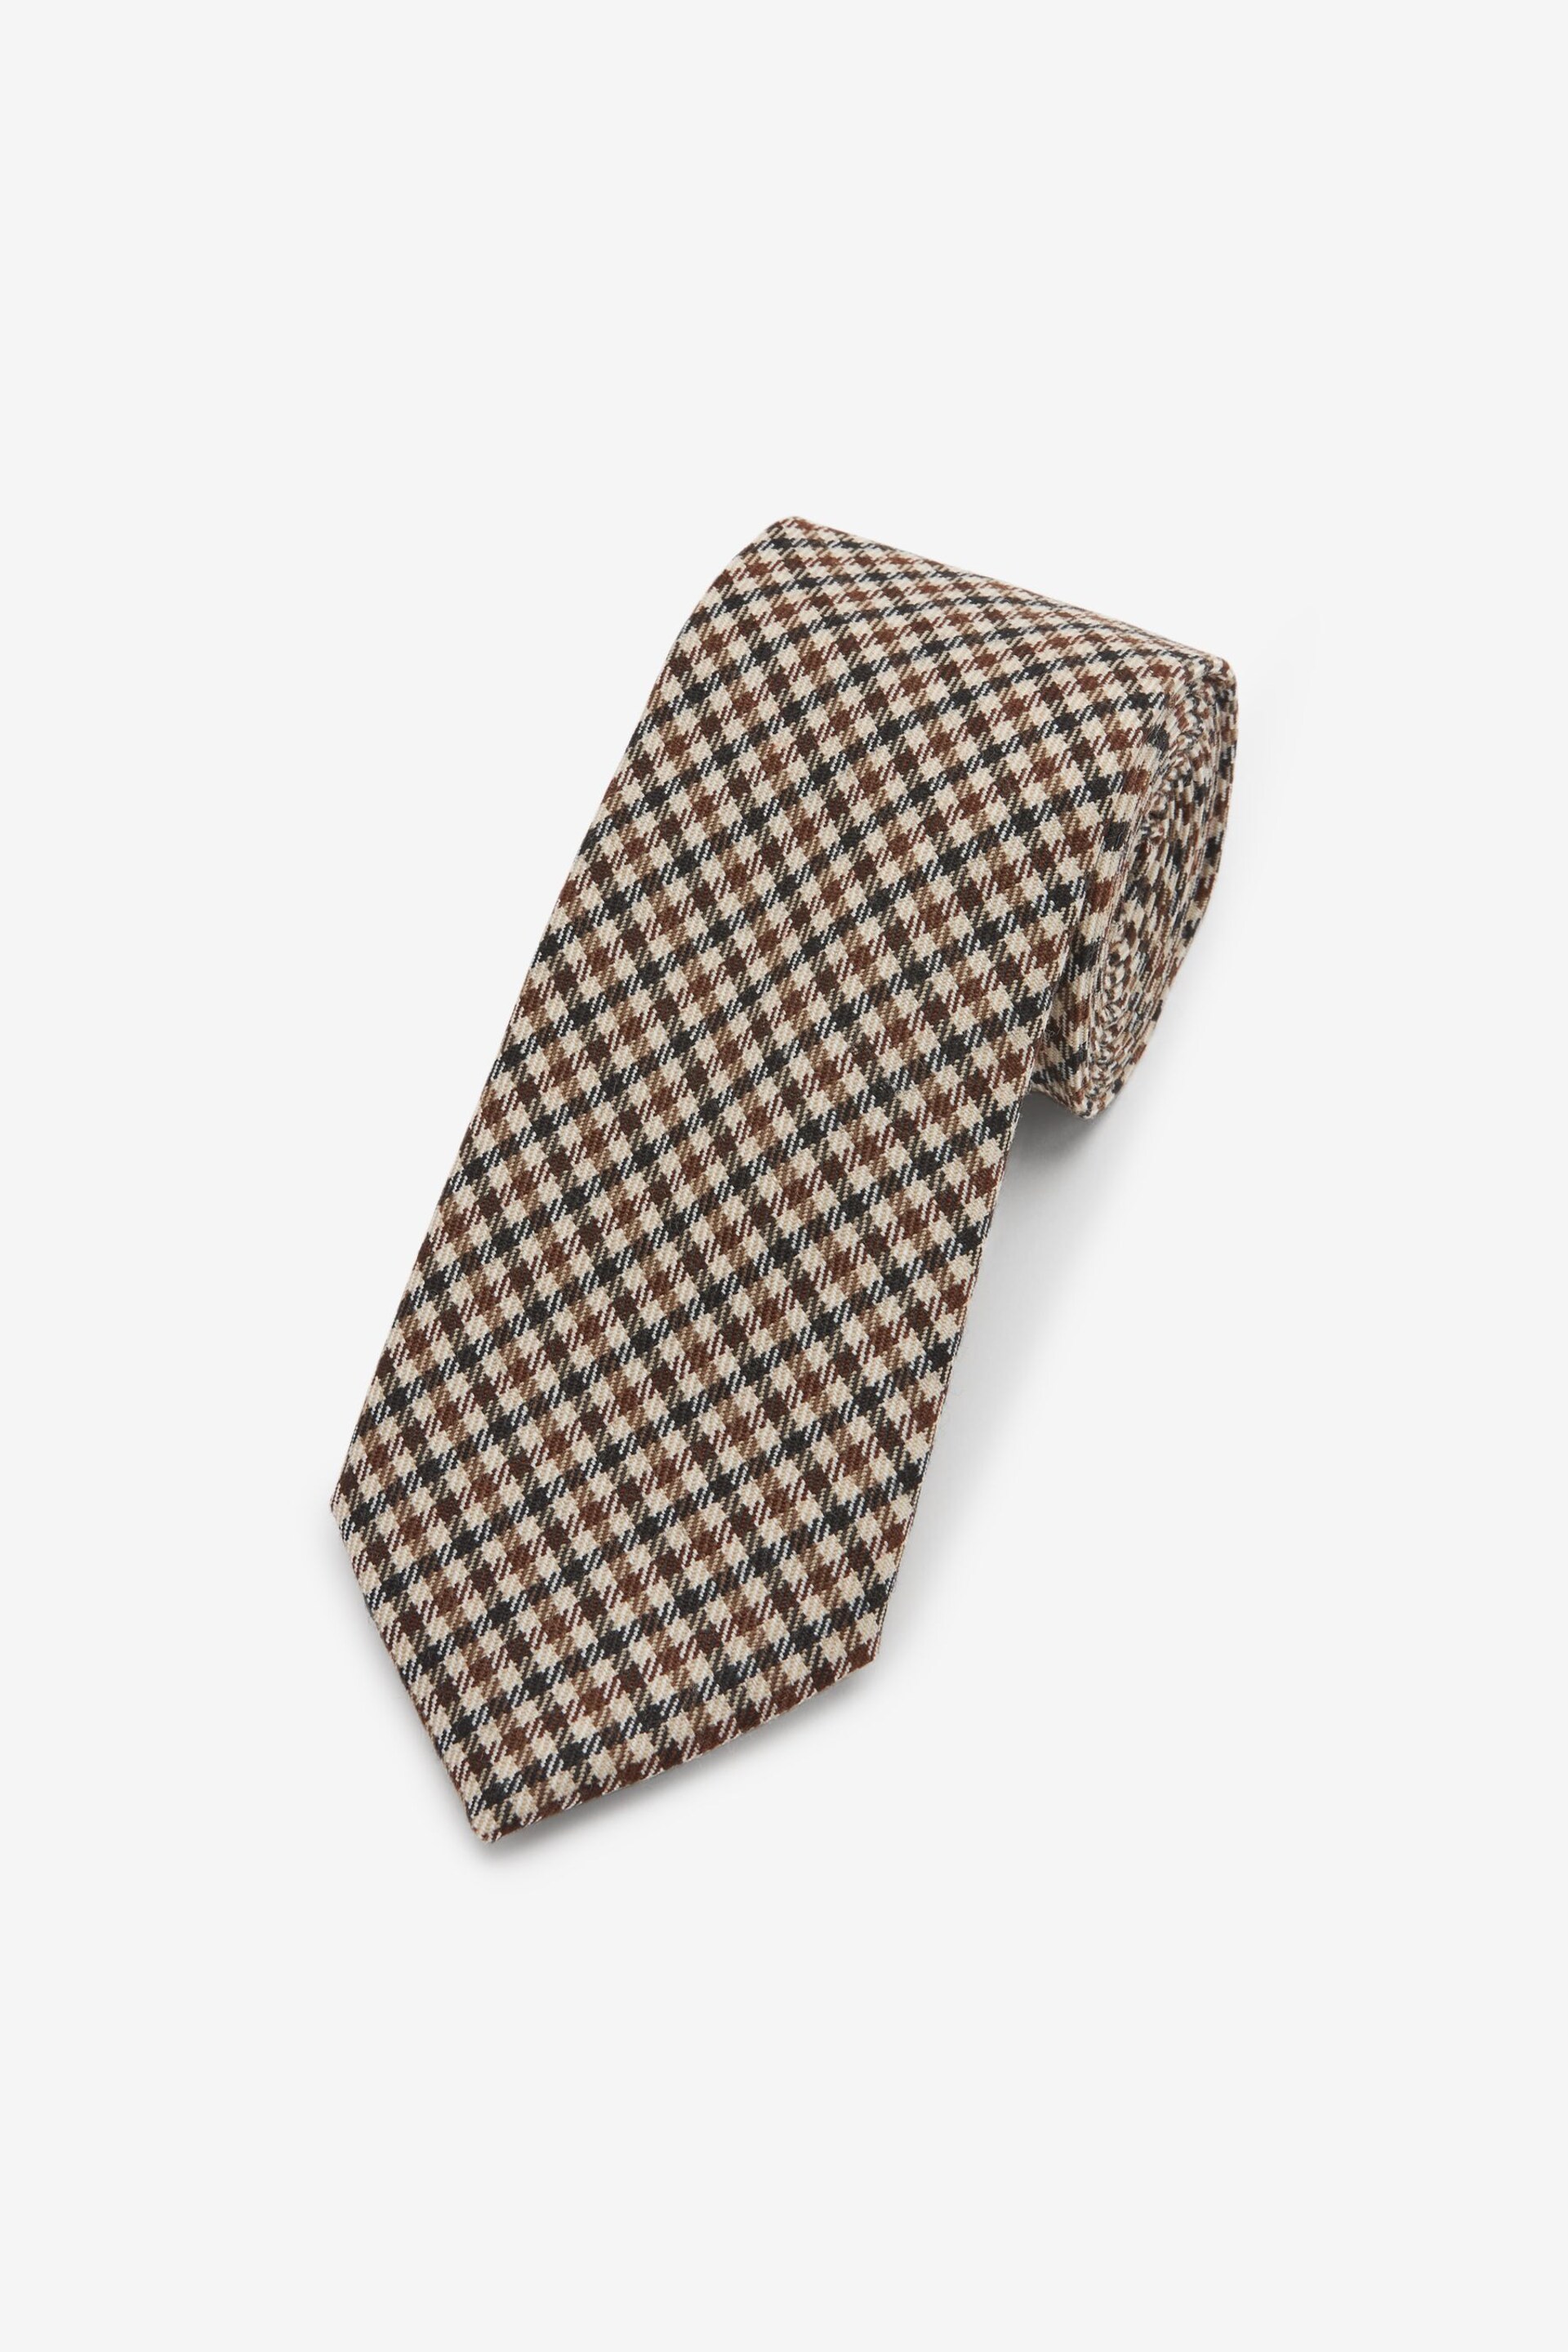 Brown Neutral Gingham Check Signature Abraham Moon And Sons Tie - Image 1 of 3